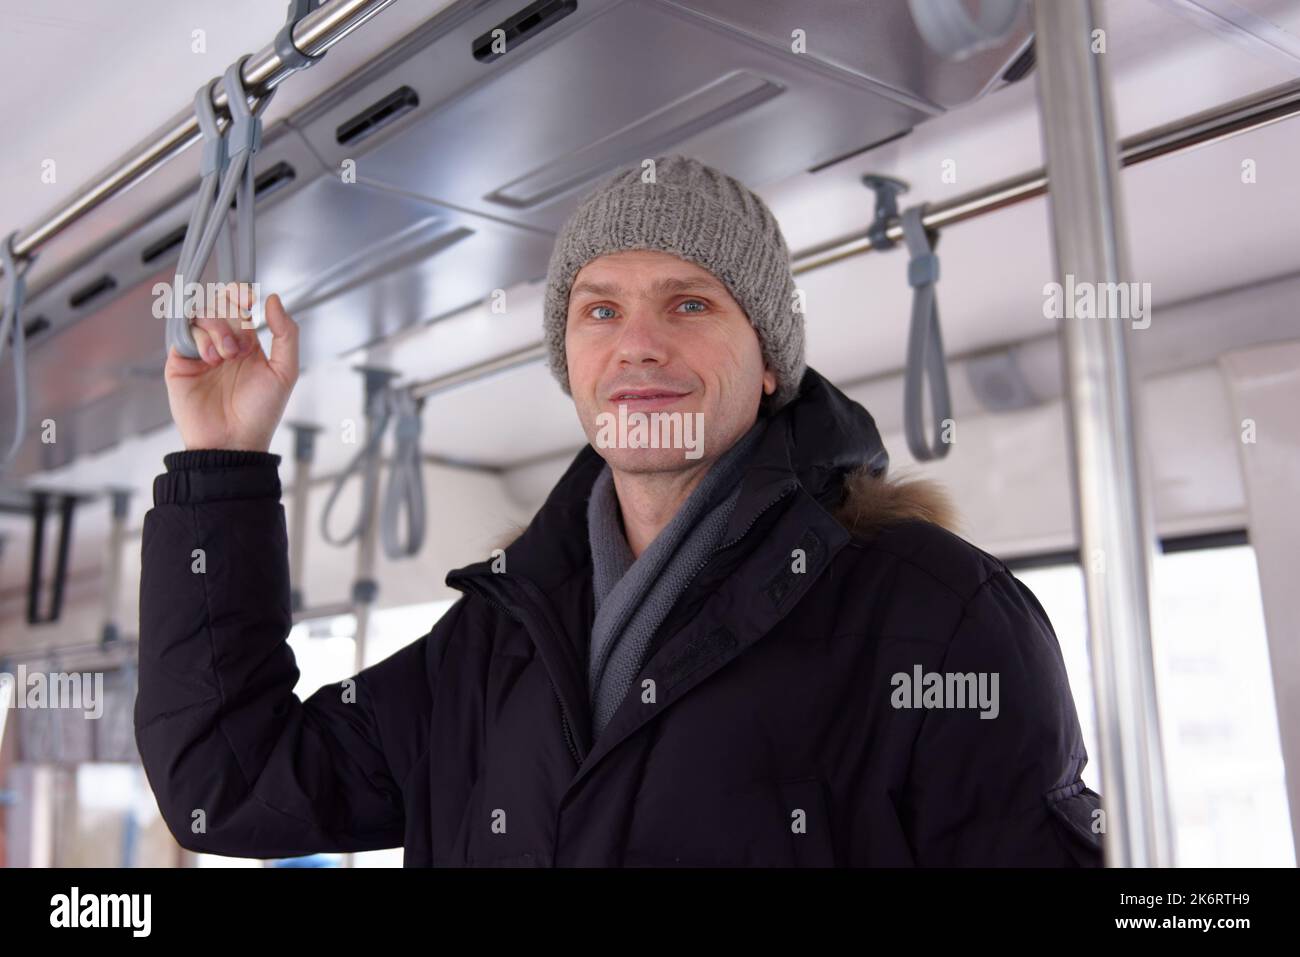 Man in winter clothes in a tram Stock Photo